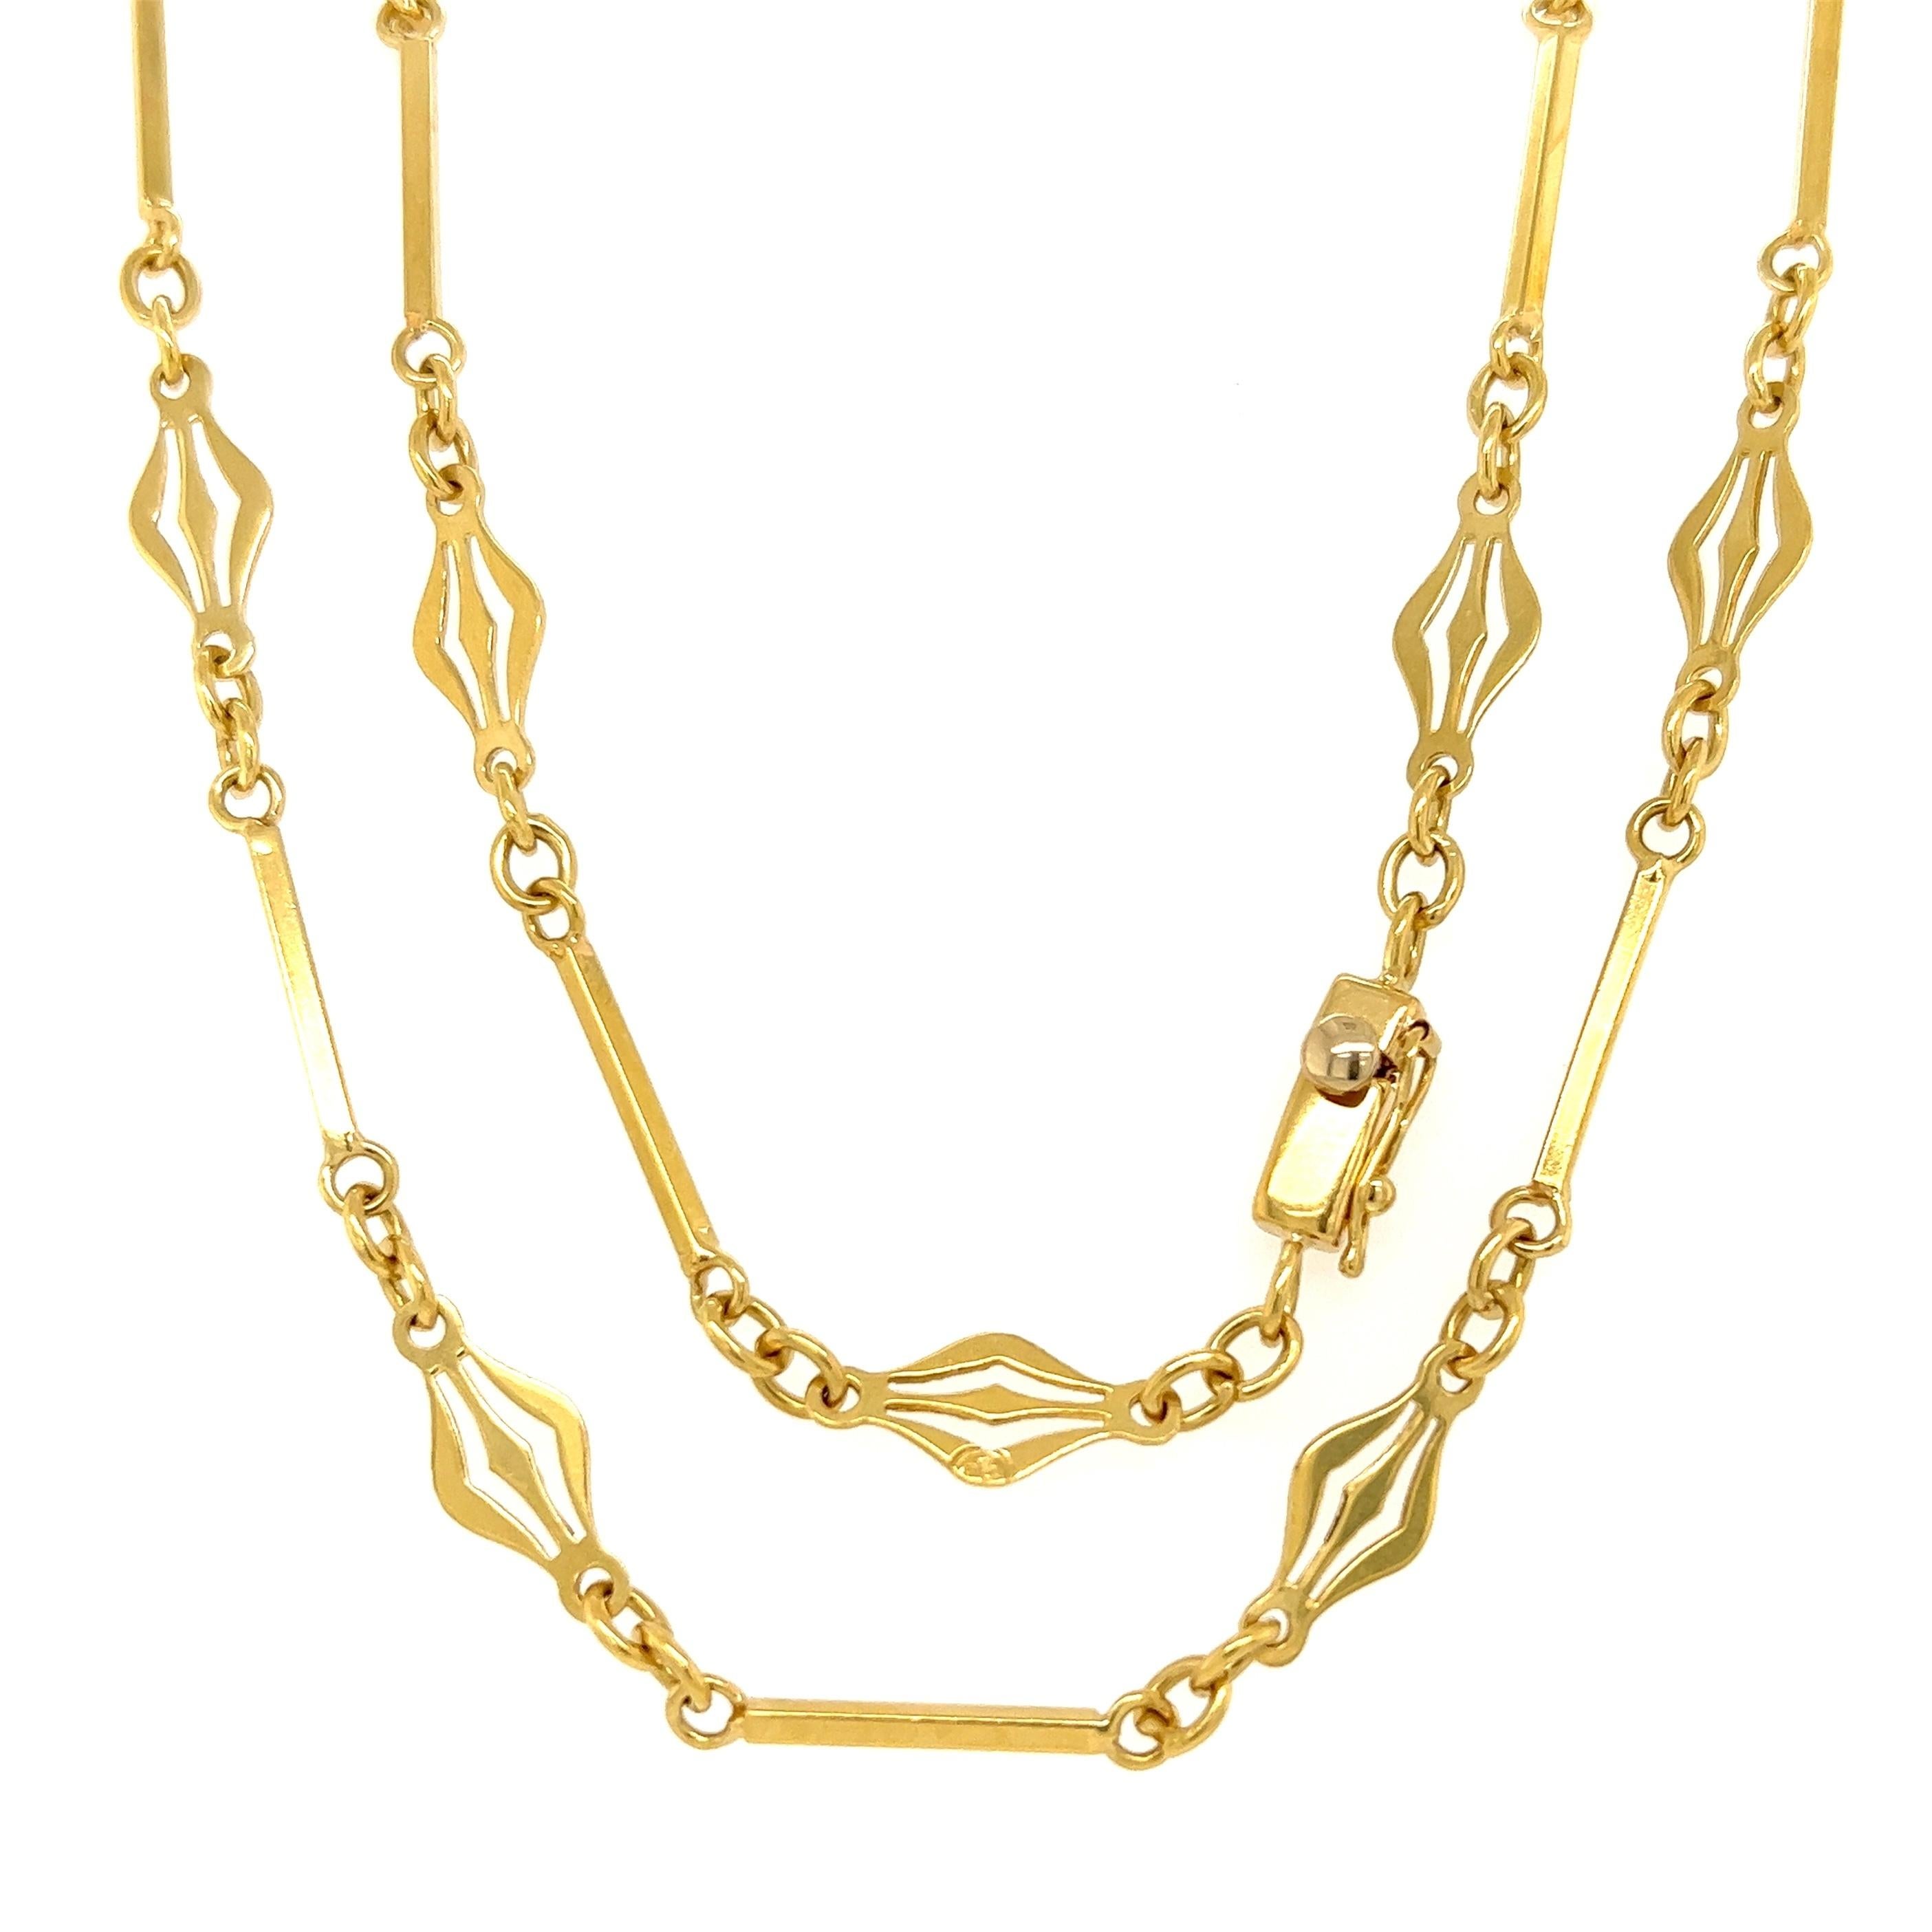 High Quality 18K Yellow Gold Art Deco Revival Open Chain Bar Link Necklace Beautifully Hand crafted in 18K Yellow Gold. Measuring approx. 36